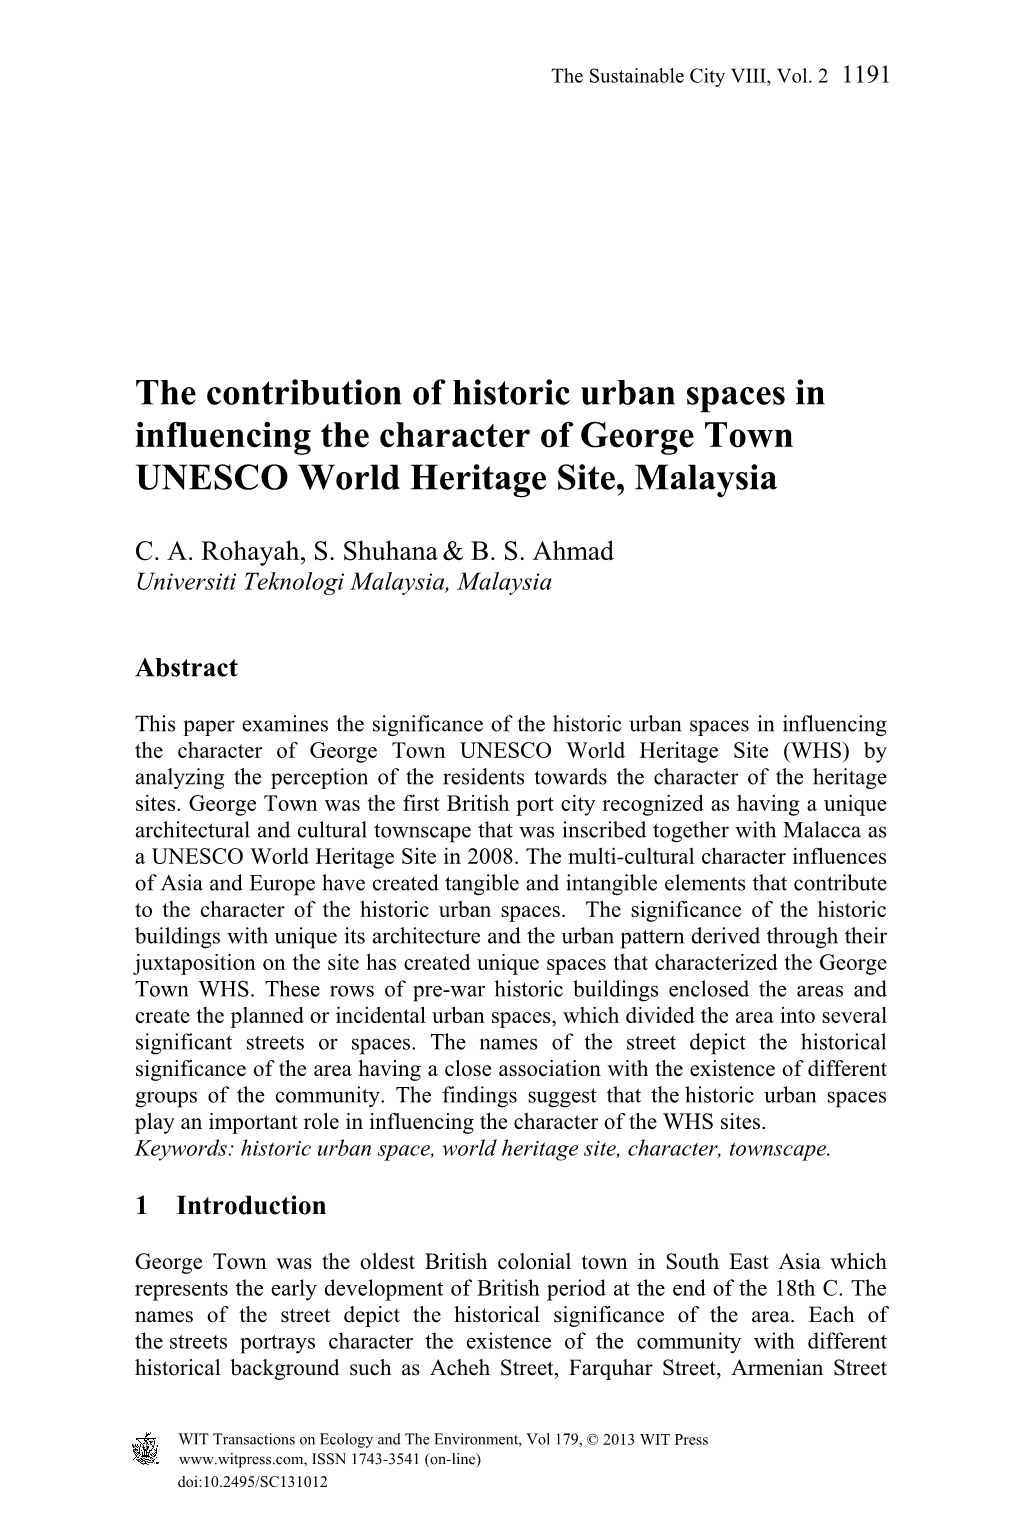 The Contribution of Historic Urban Spaces in Influencing the Character of George Town UNESCO World Heritage Site, Malaysia